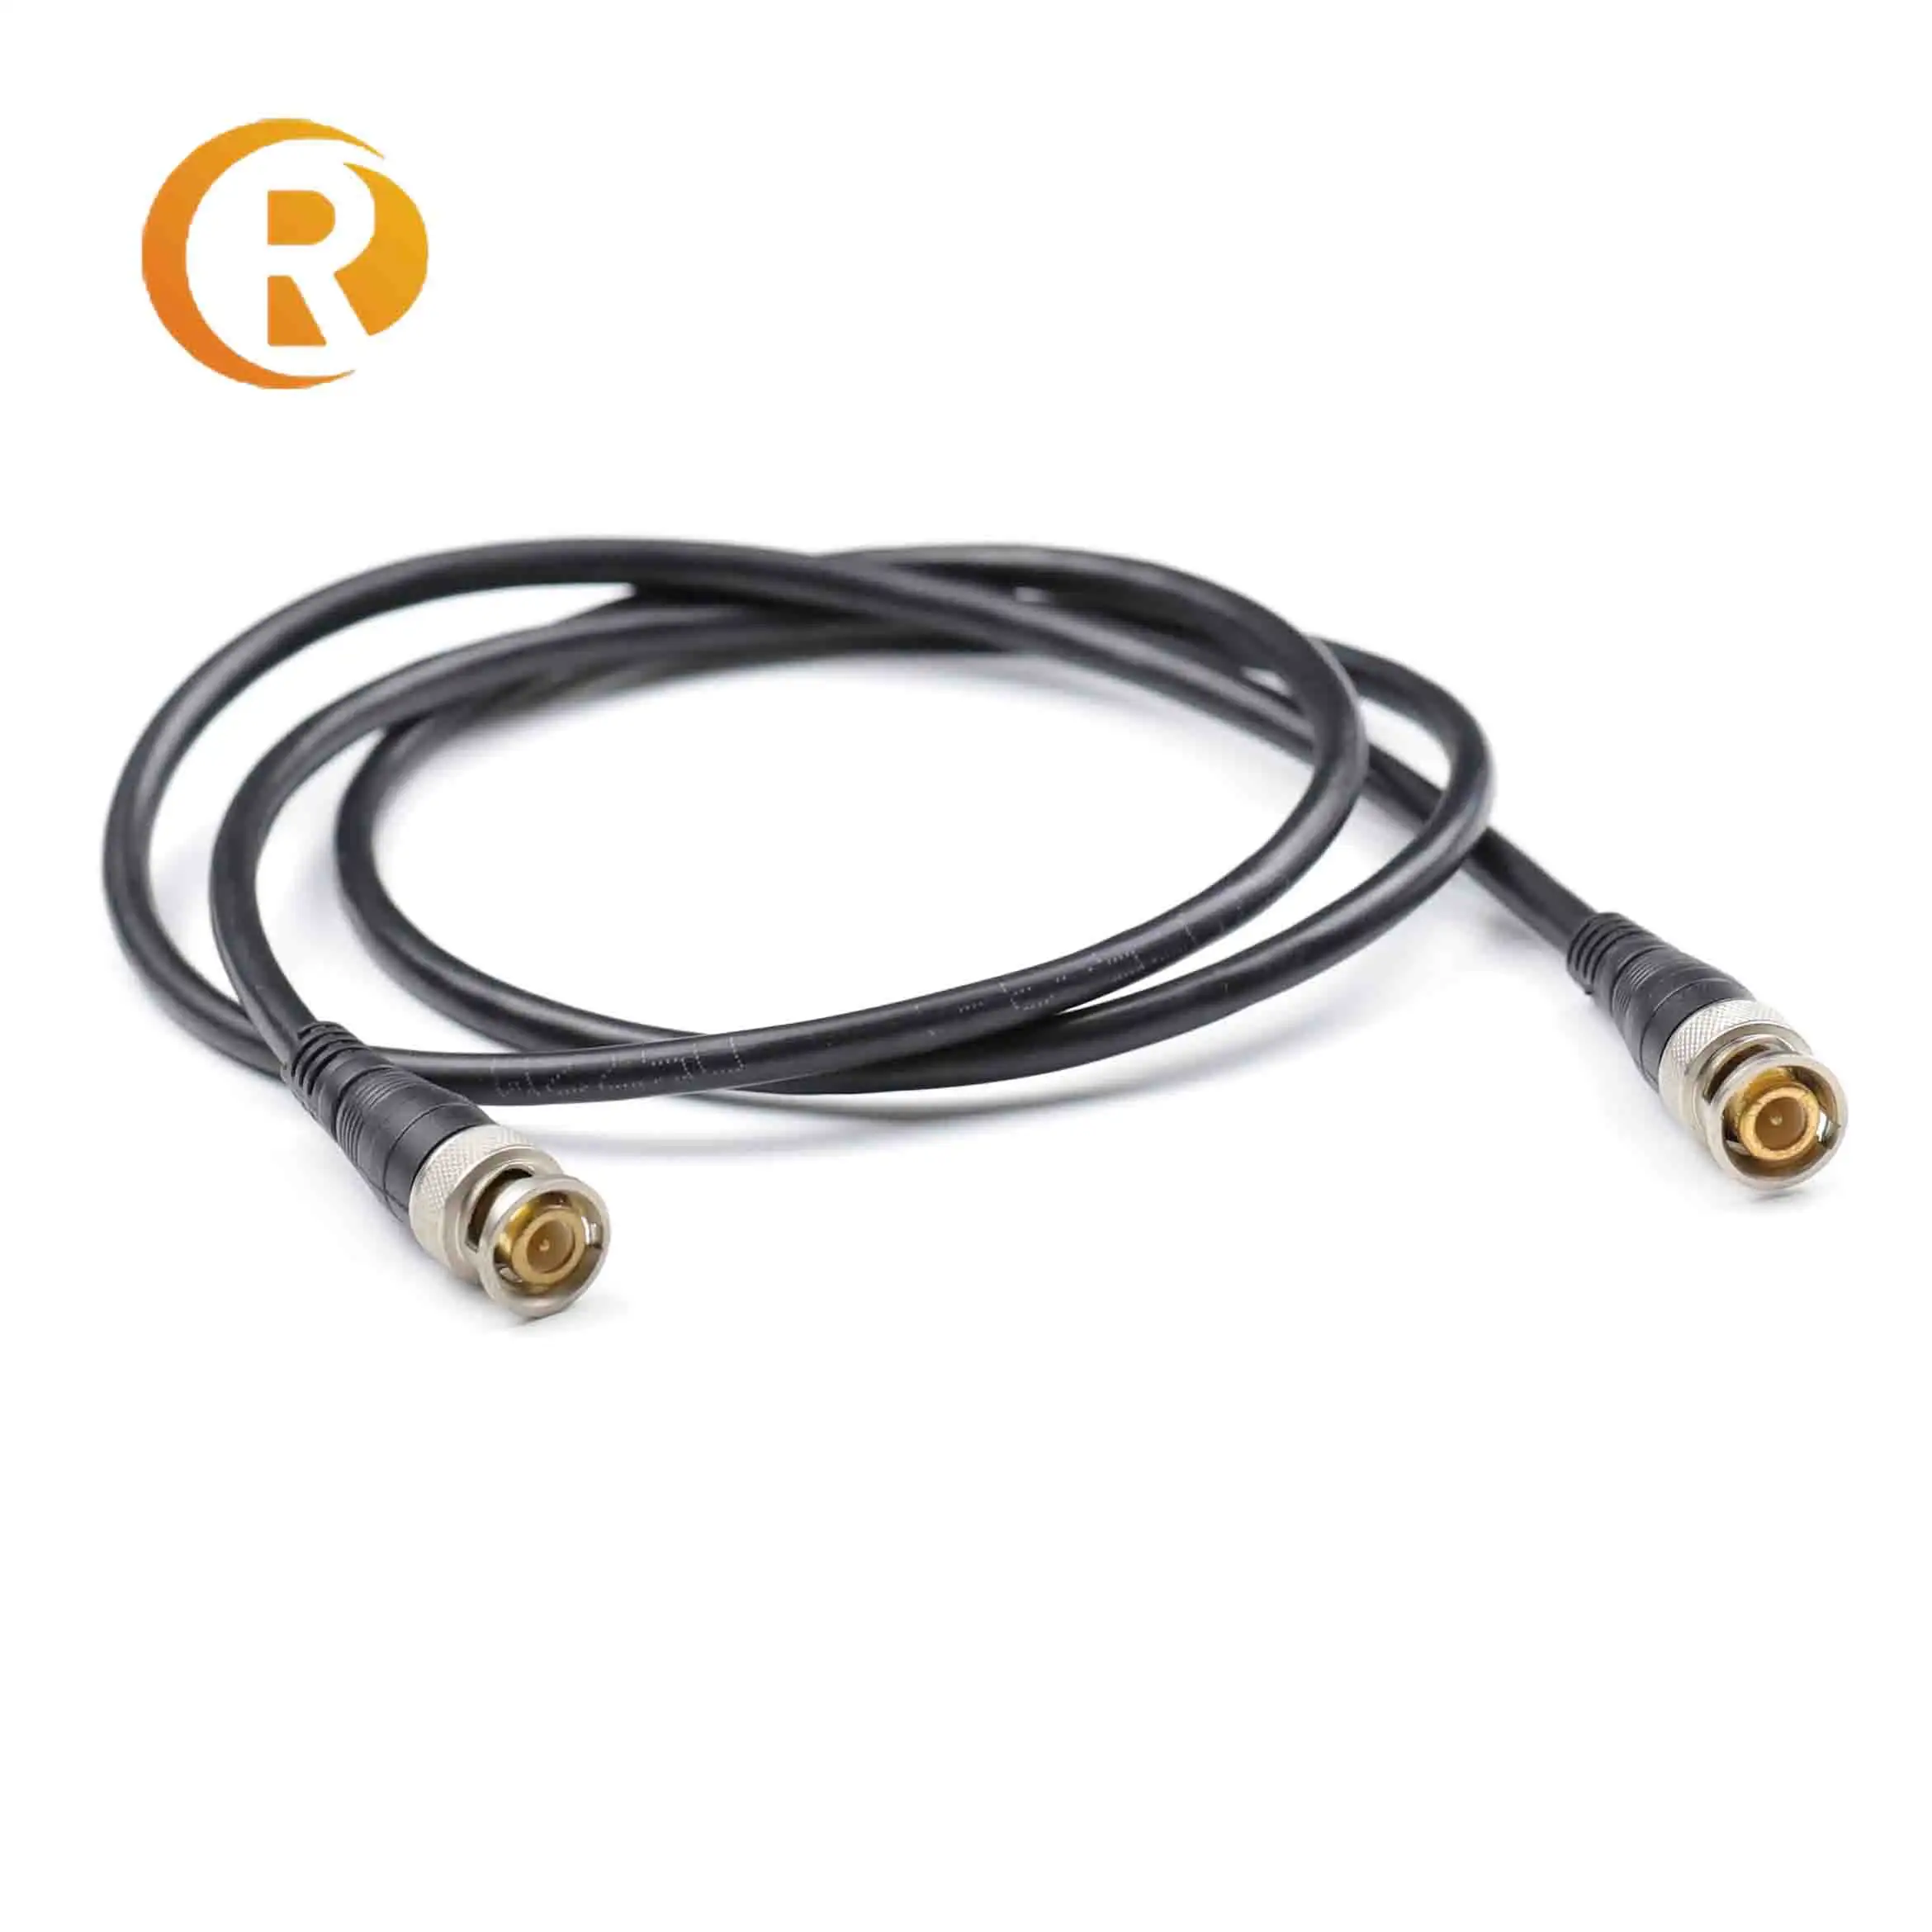 RG6 RG59 RG58 RG11 RG Series Coaxial Cable With High Quality